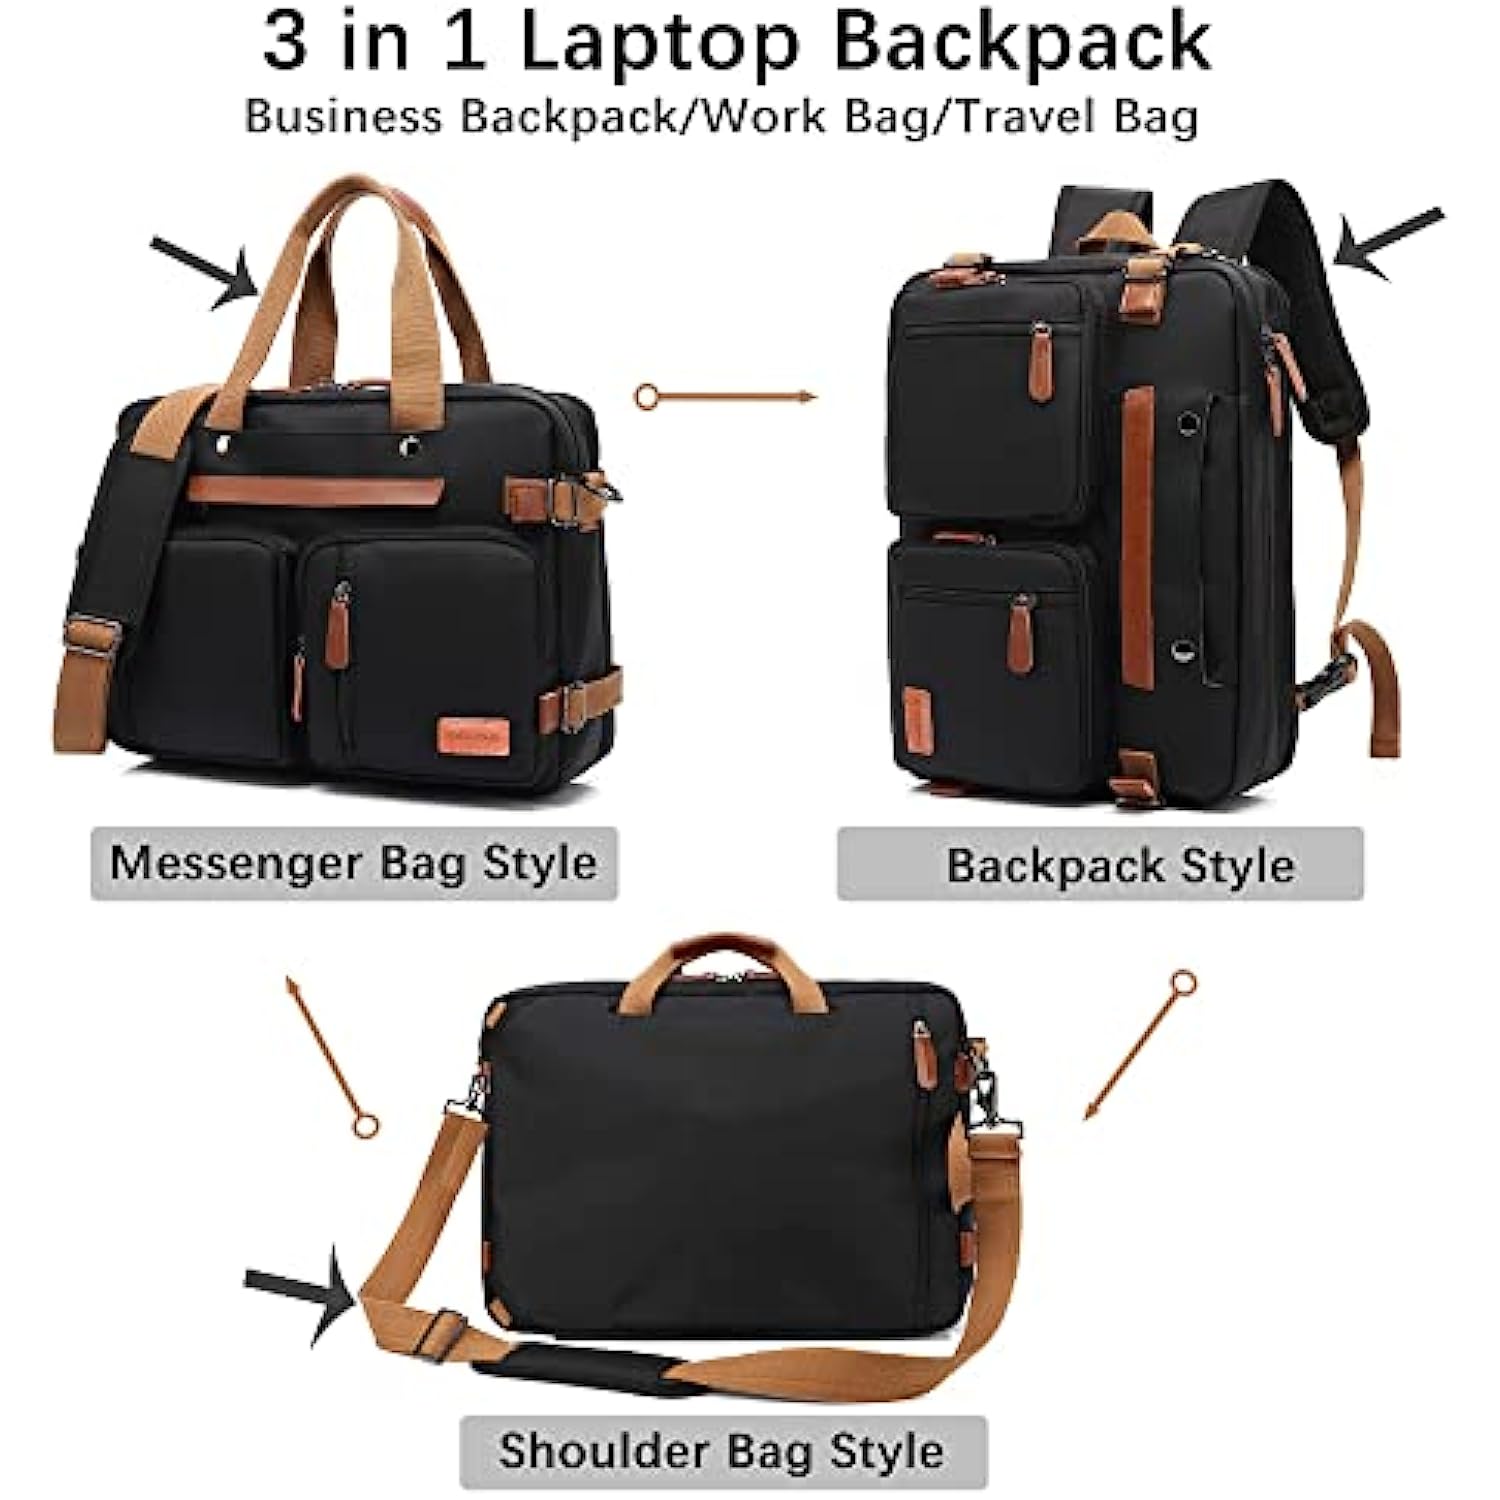 17.3 Inch Water-Proof Briefcase Multi-functional Notebook Computer Bag for Travel Business